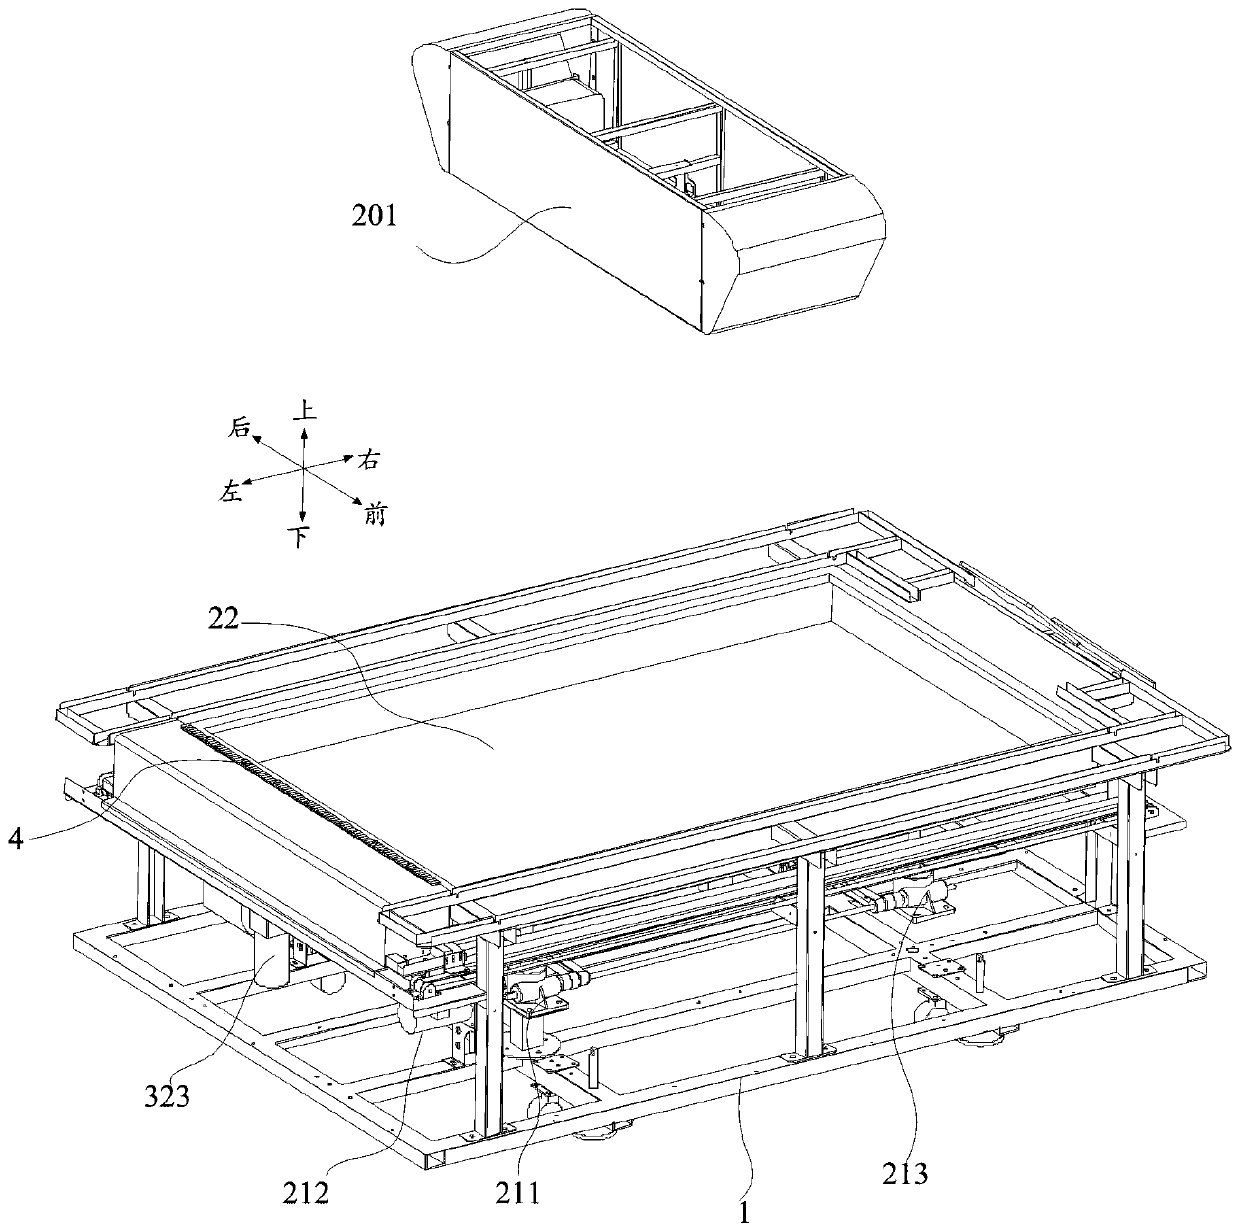 Projection sand table capable of automatically constructing terrain and projection system